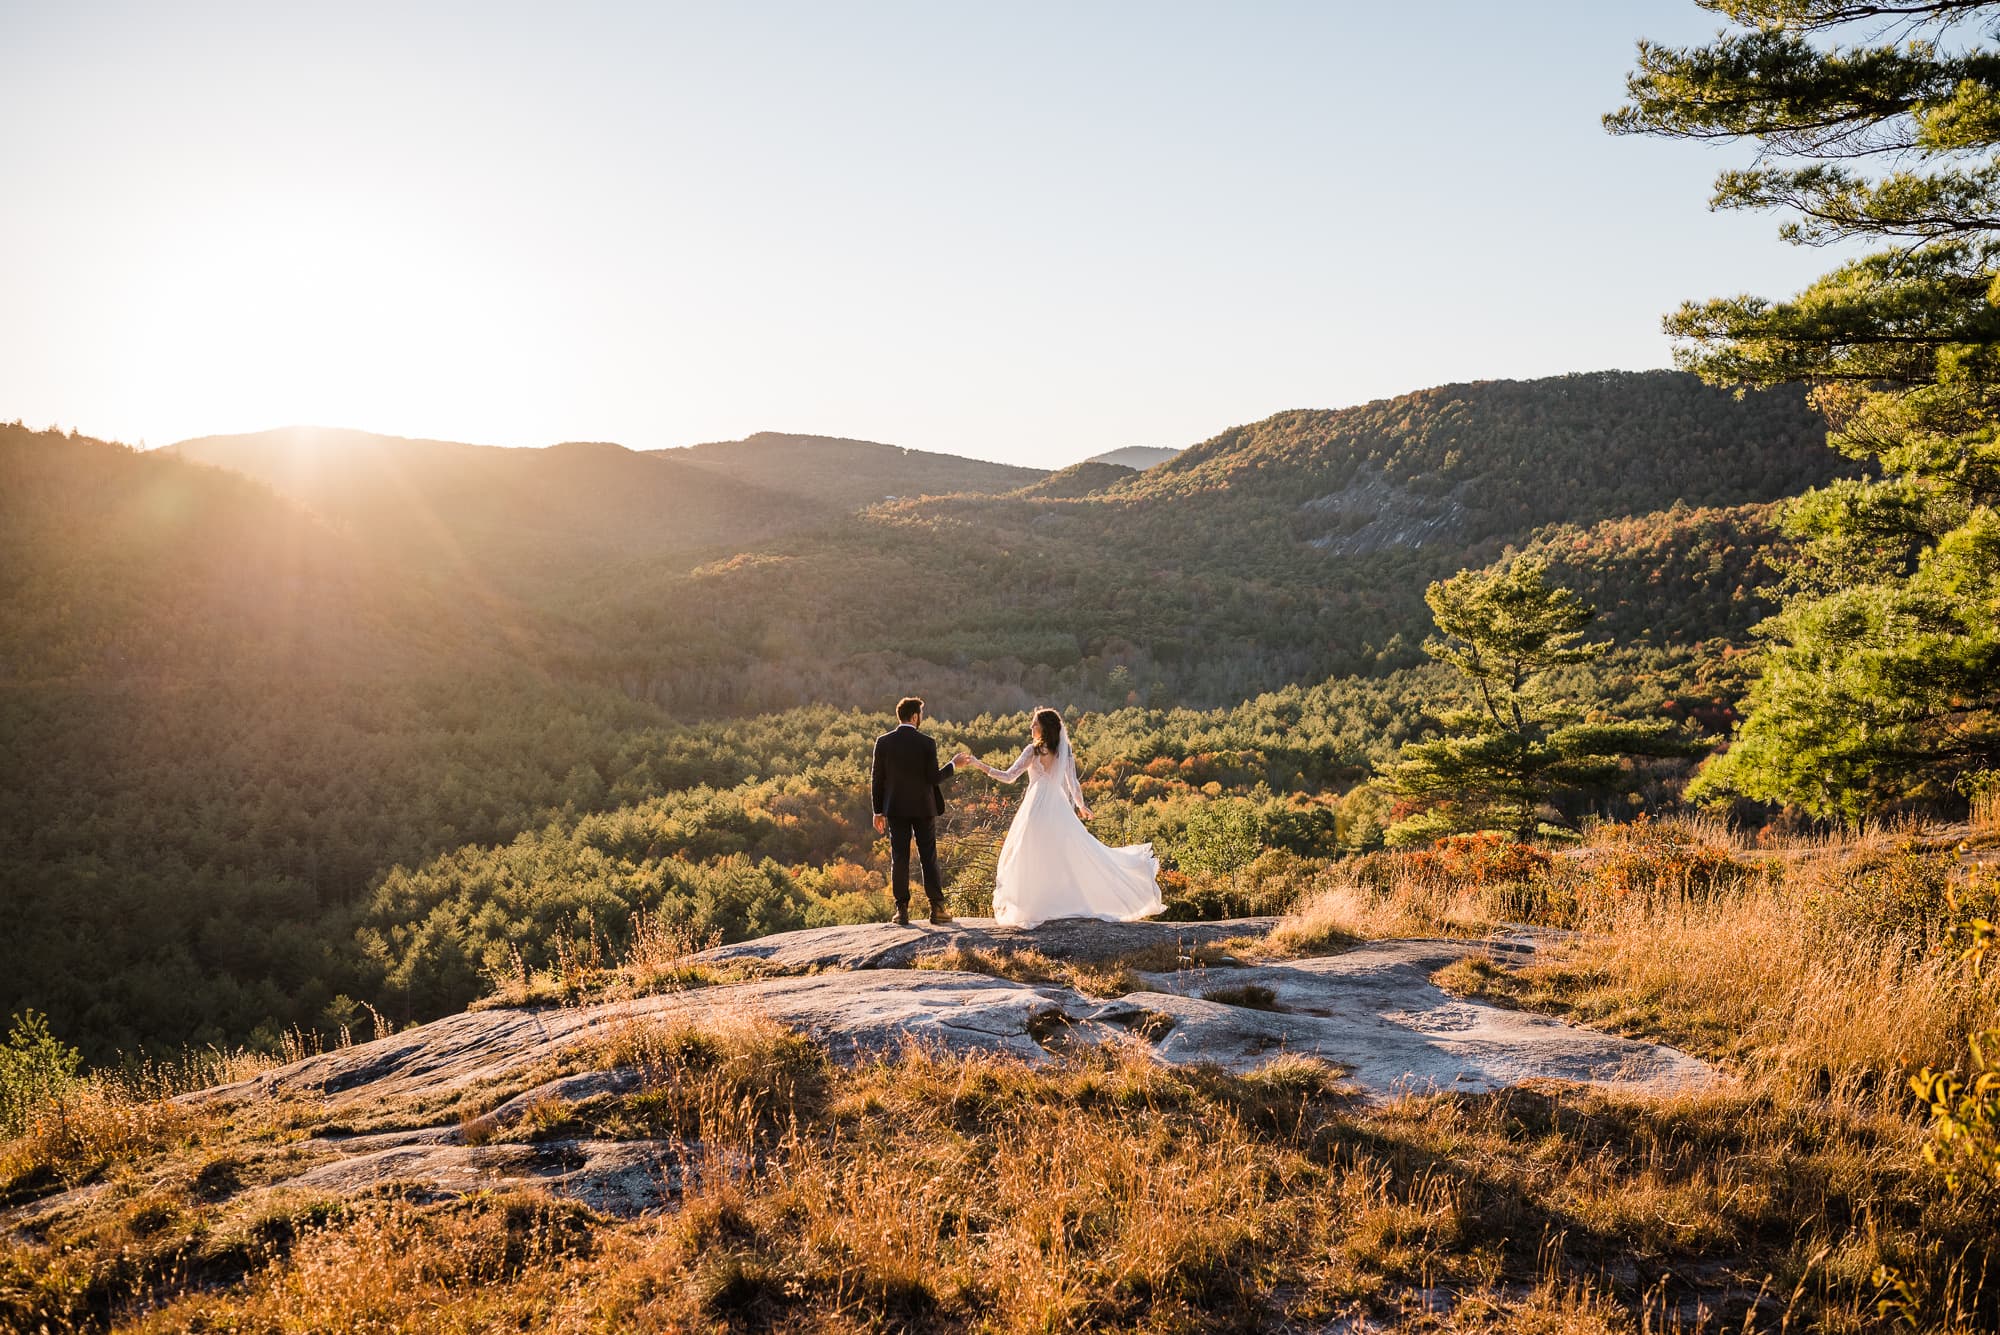 Eloping couple in the mountains near Nantahala National Forest in North Carolina